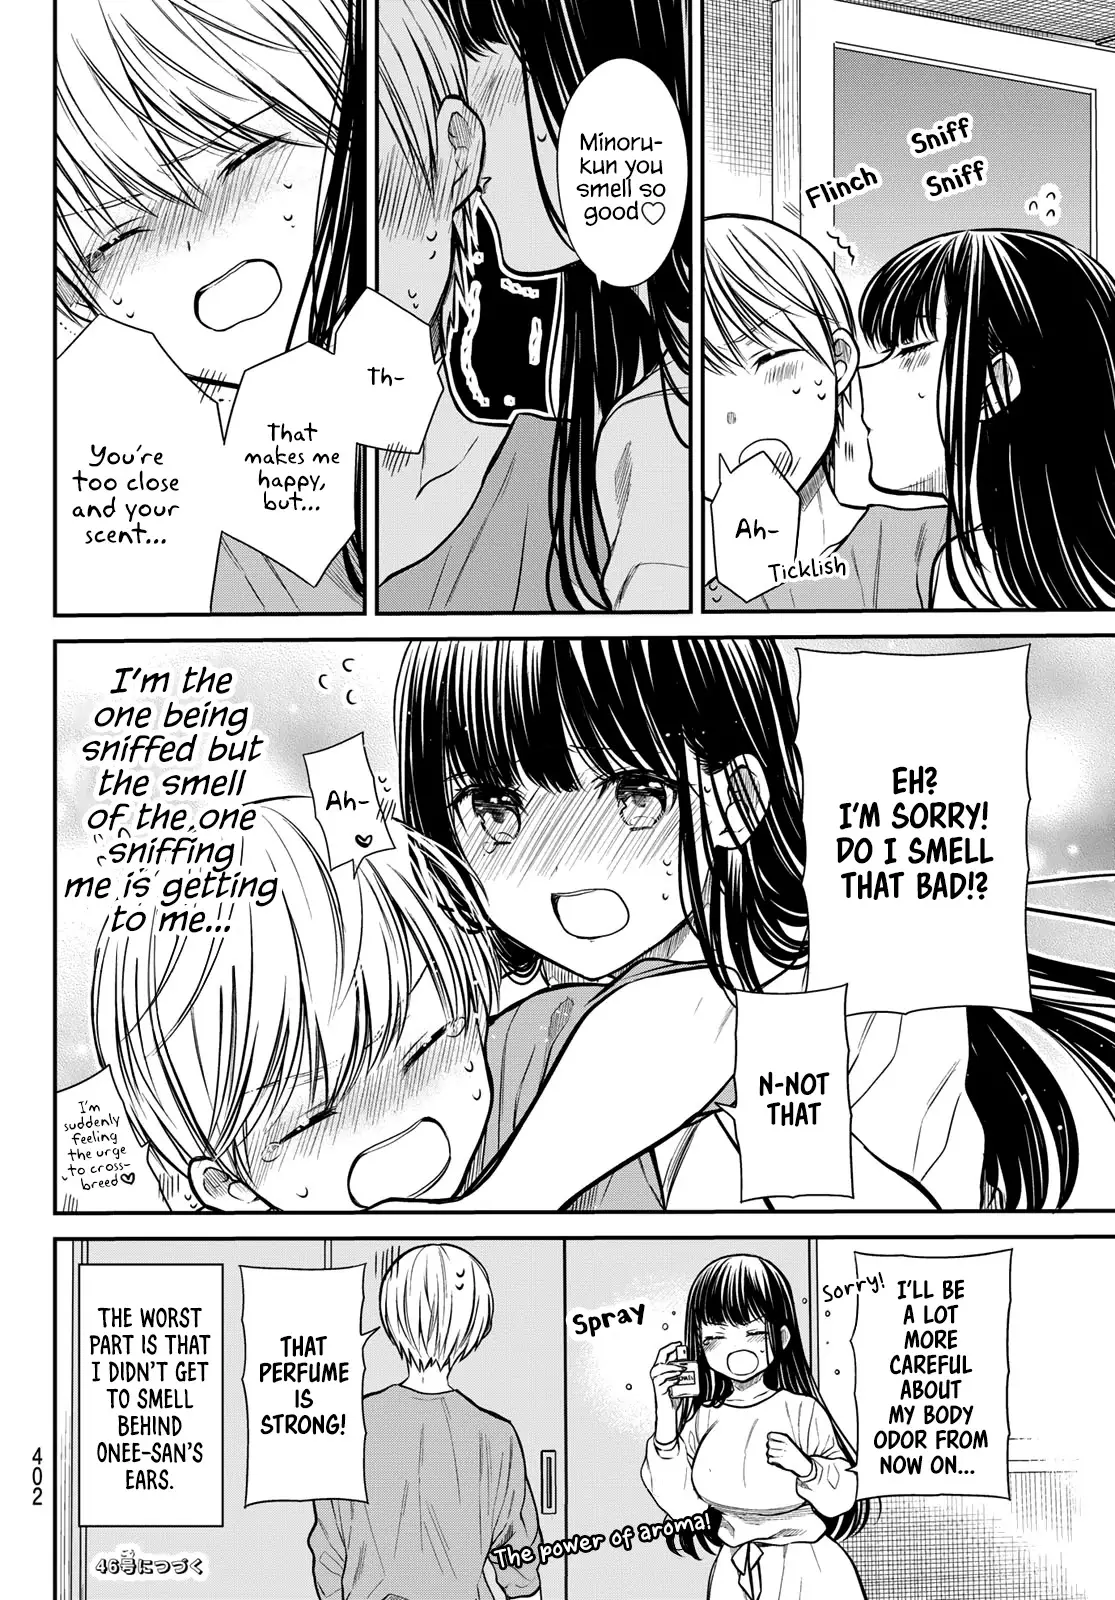 The Story Of An Onee-San Who Wants To Keep A High School Boy - 233 page 5